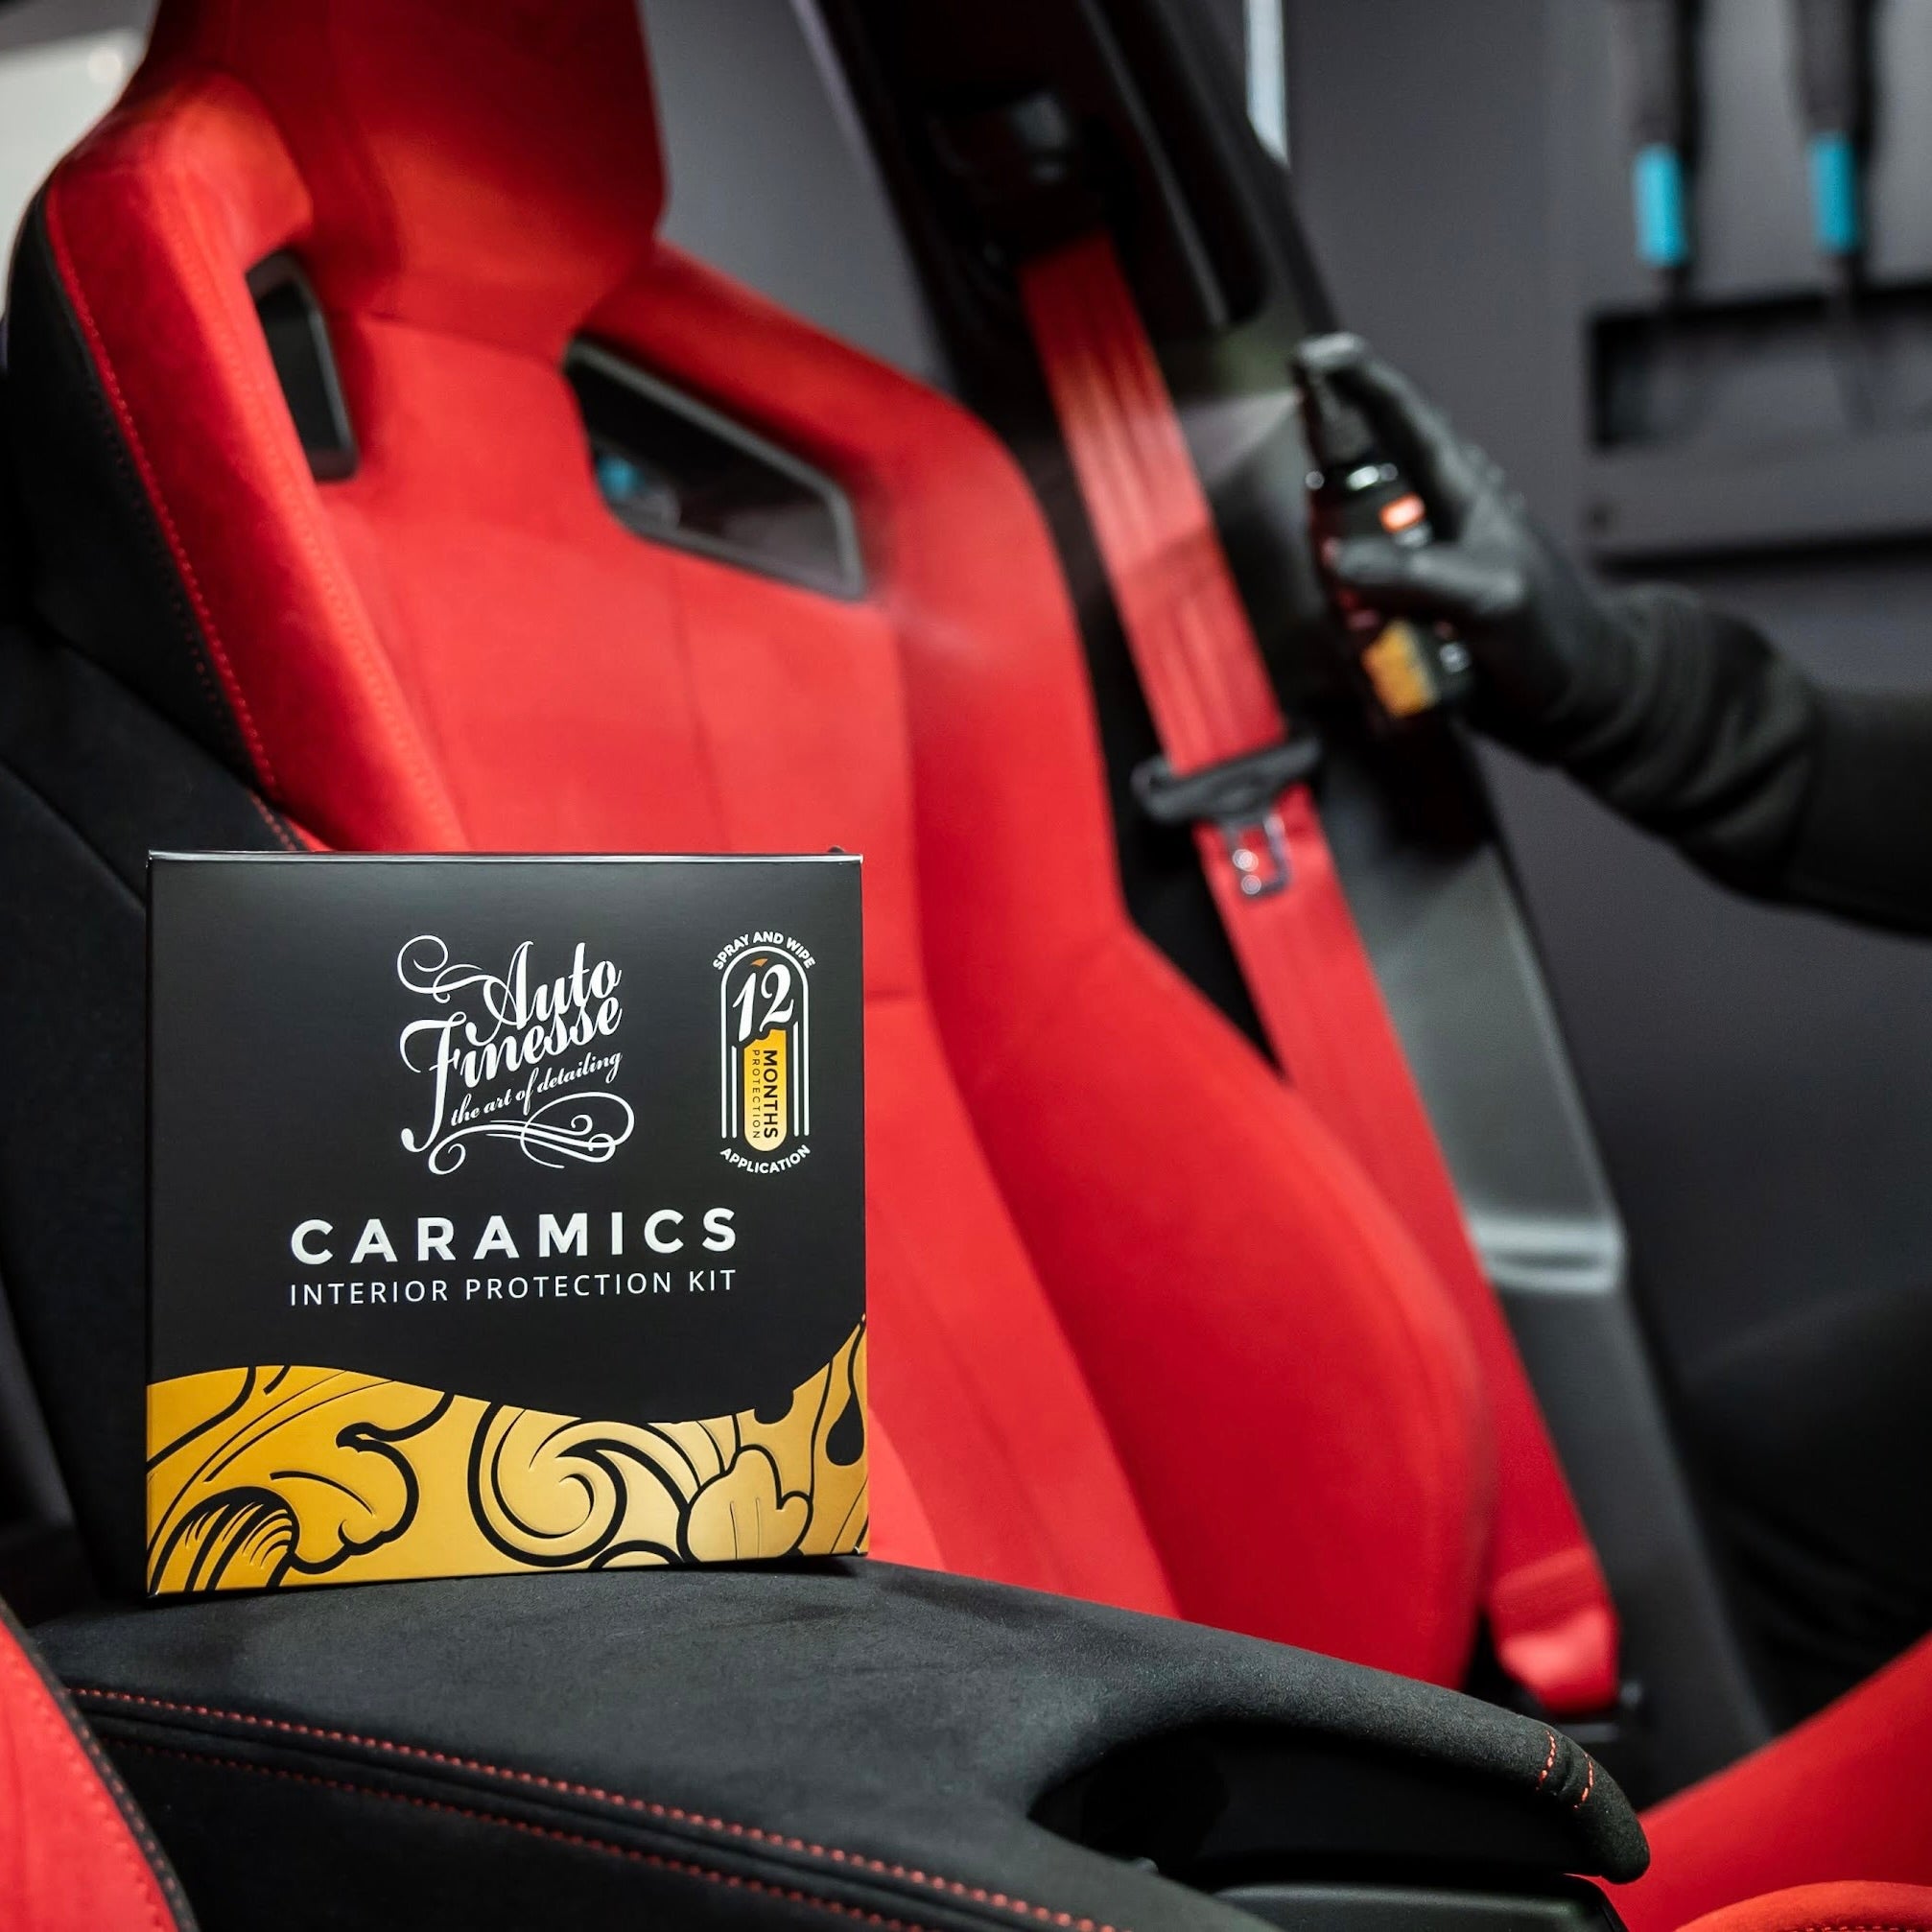 Auto Finesse | Car Detailing Products | Caramics Interior Protection Kit